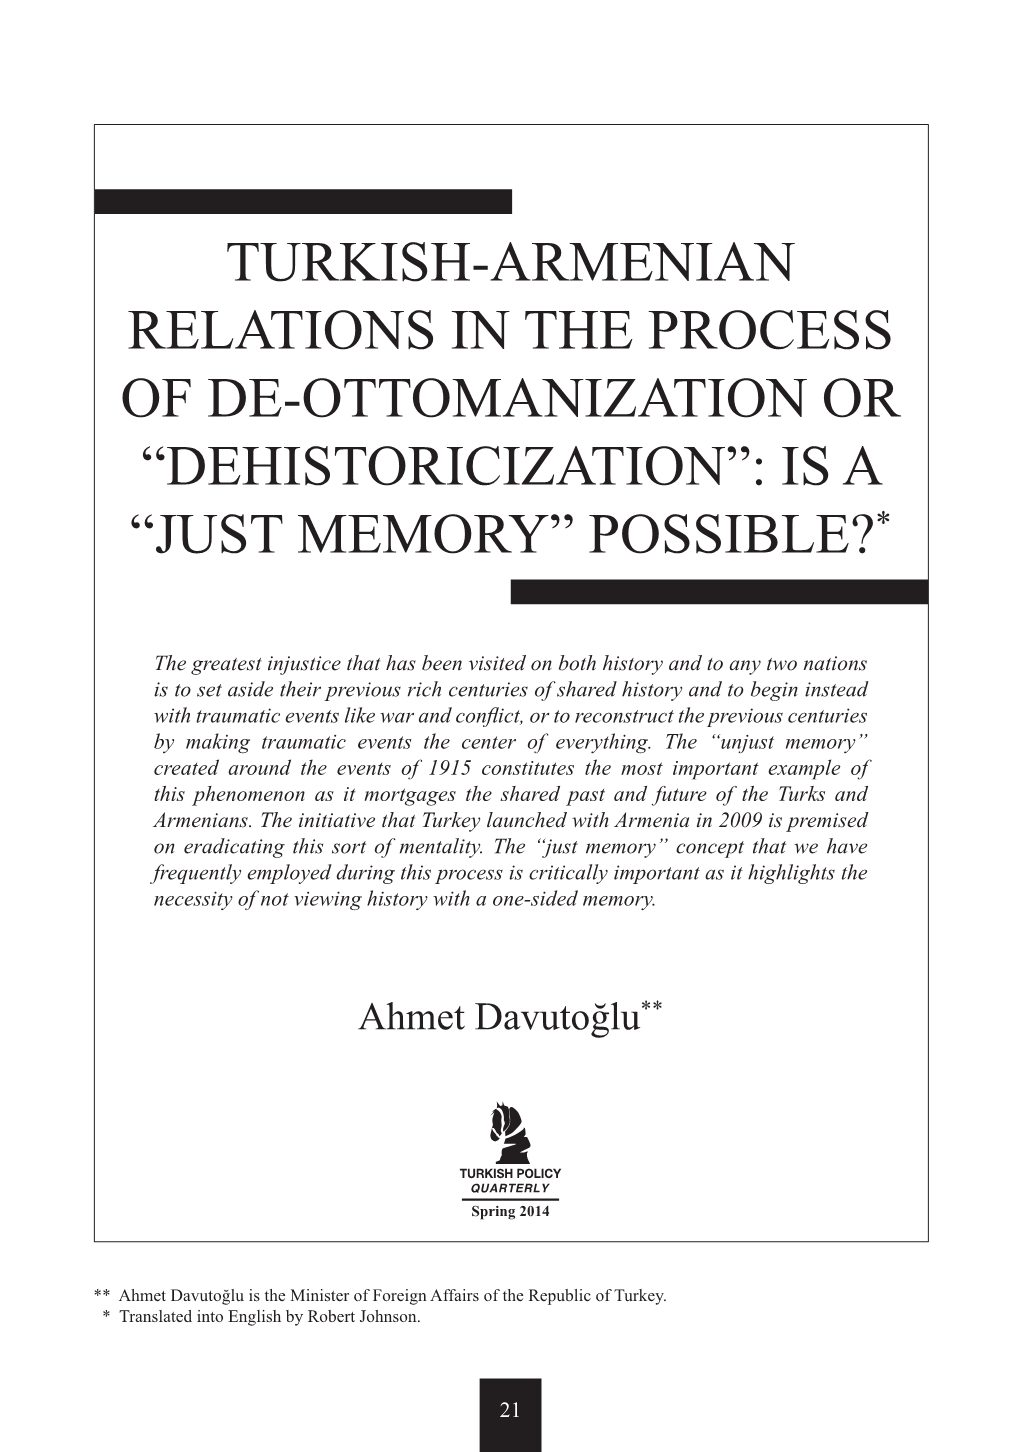 Turkish-Armenian Relations in the Process of De-Ottomanization Or “Dehistoricization”: Is a “Just Memory” Possible?*